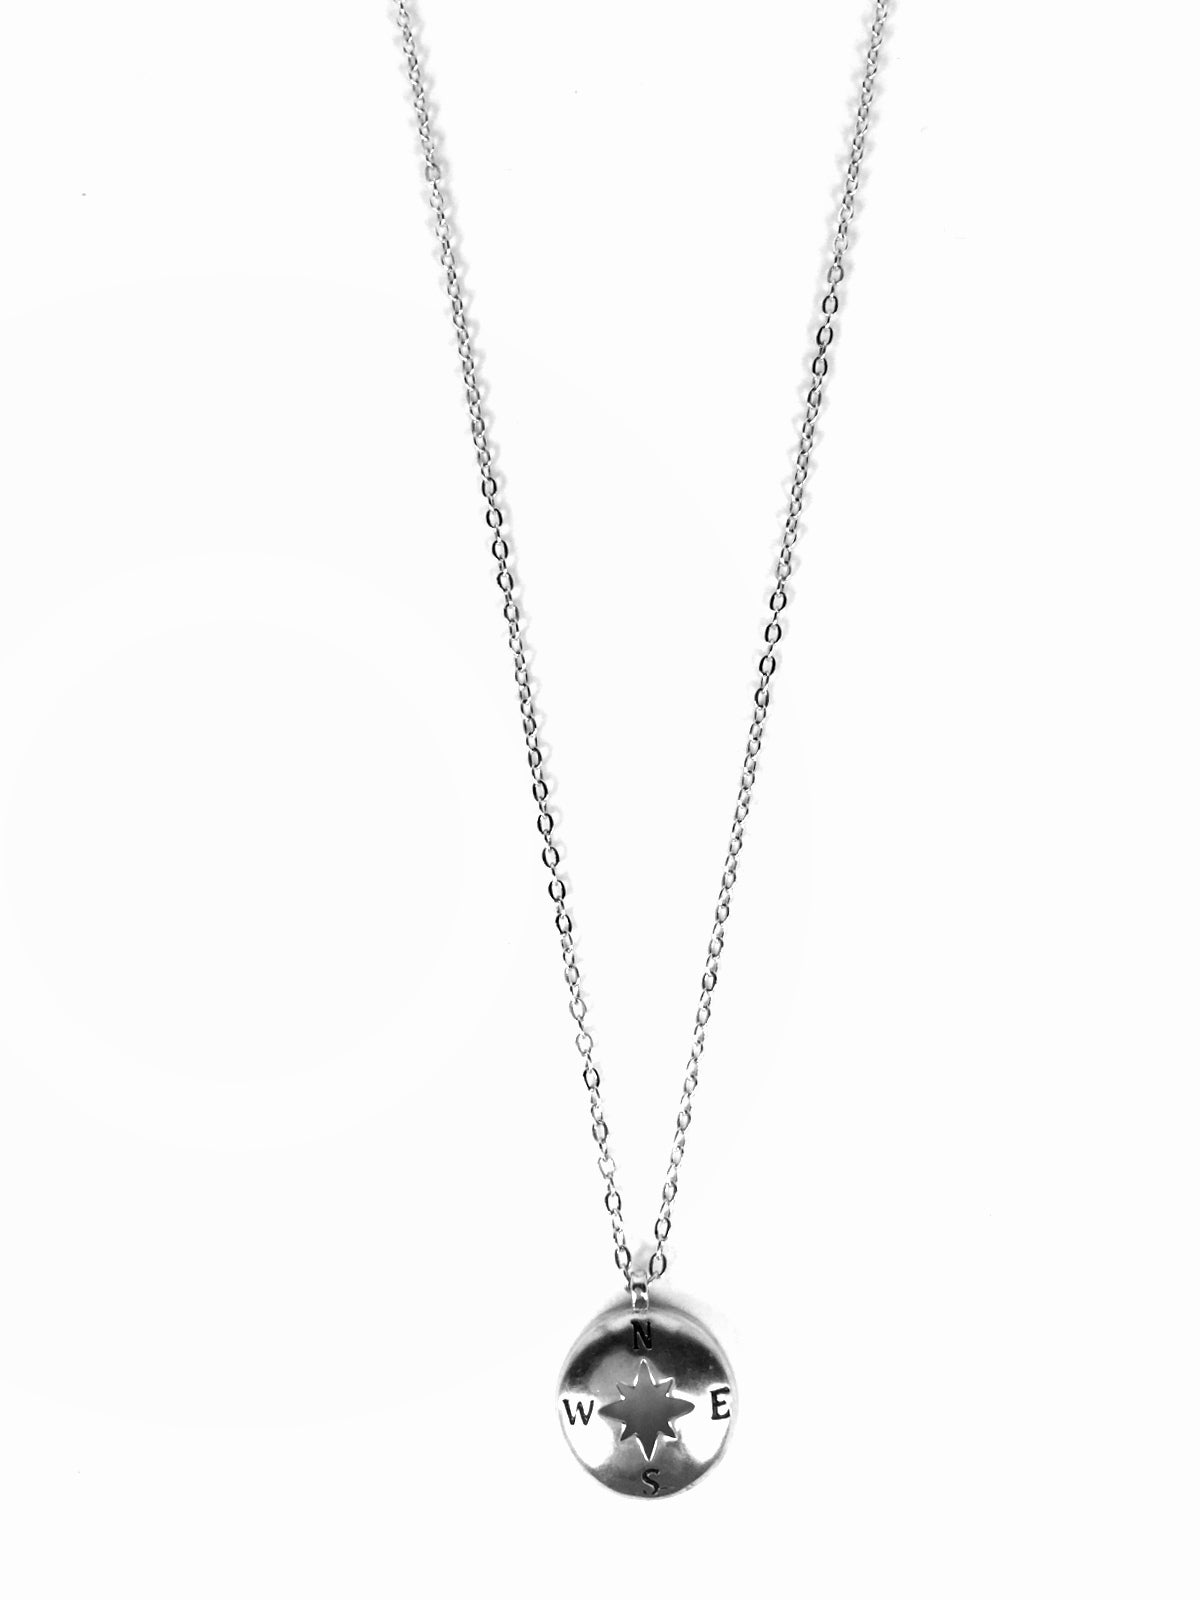 COMPASS STERLING SILVER NECKLACE